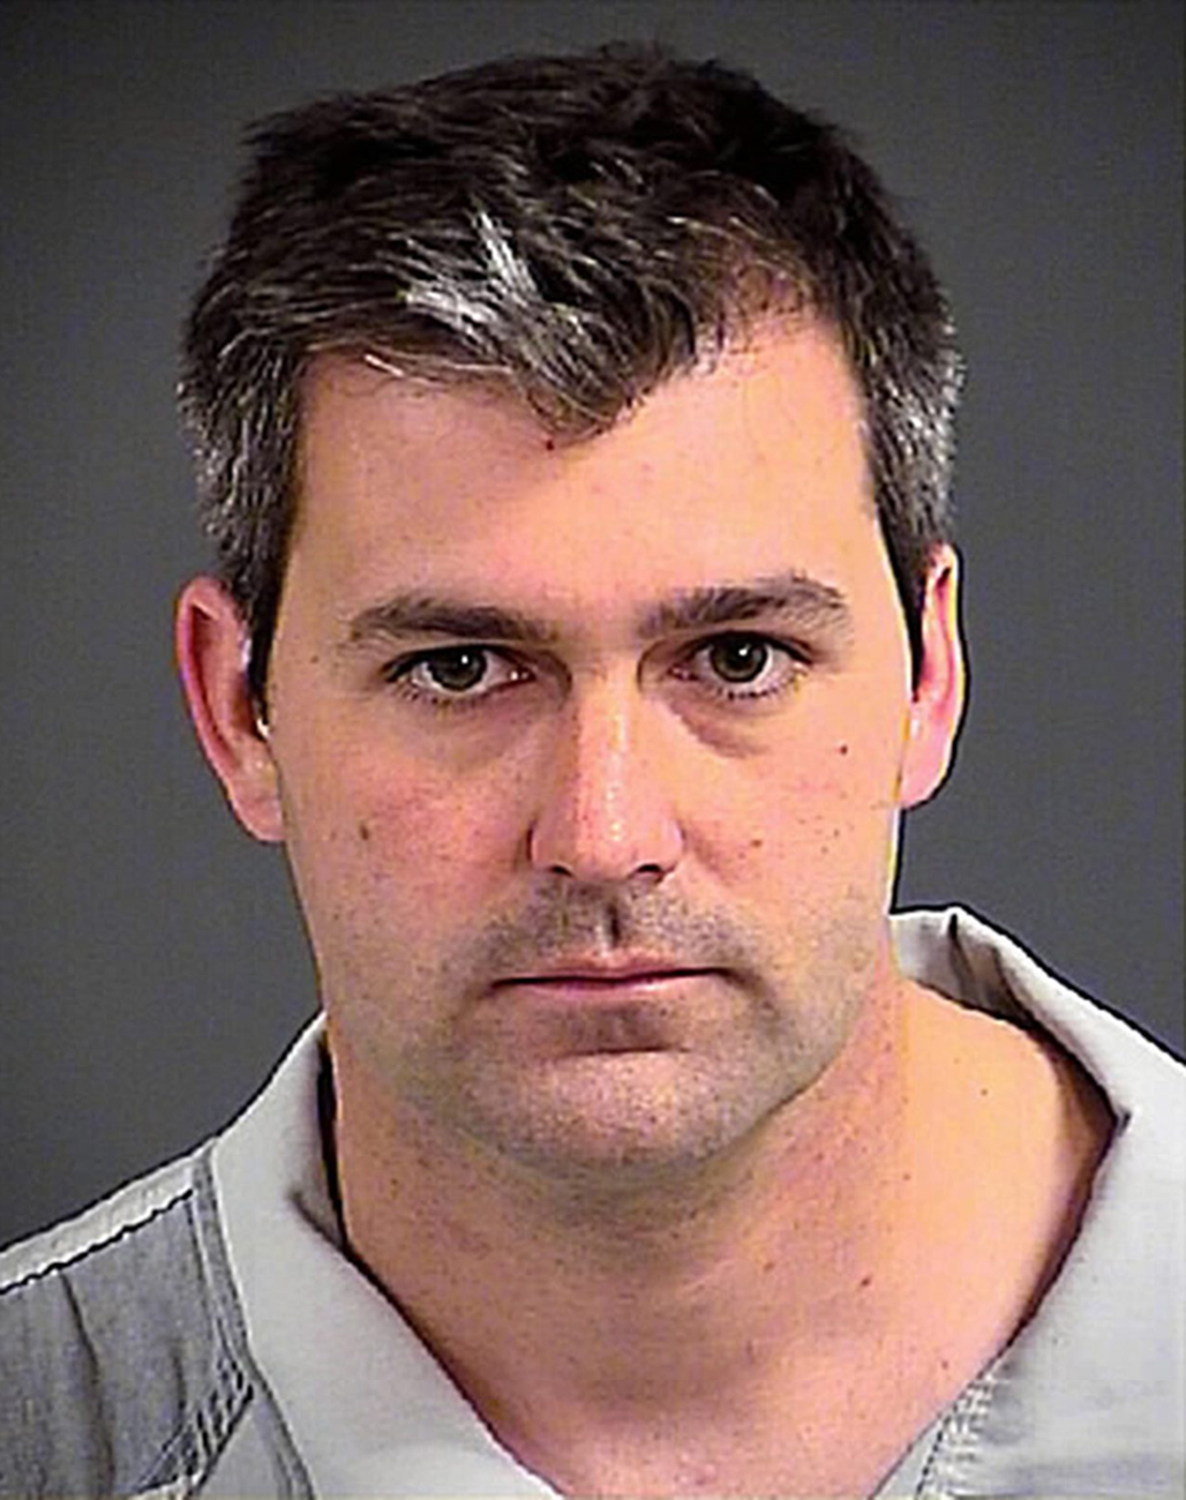 Michael T. Slager, 33, was charged with the murder of Walter L. Scott, 50. (Photo: North Charleston Sheriff's Office/ZUMA Press/Newscom) 